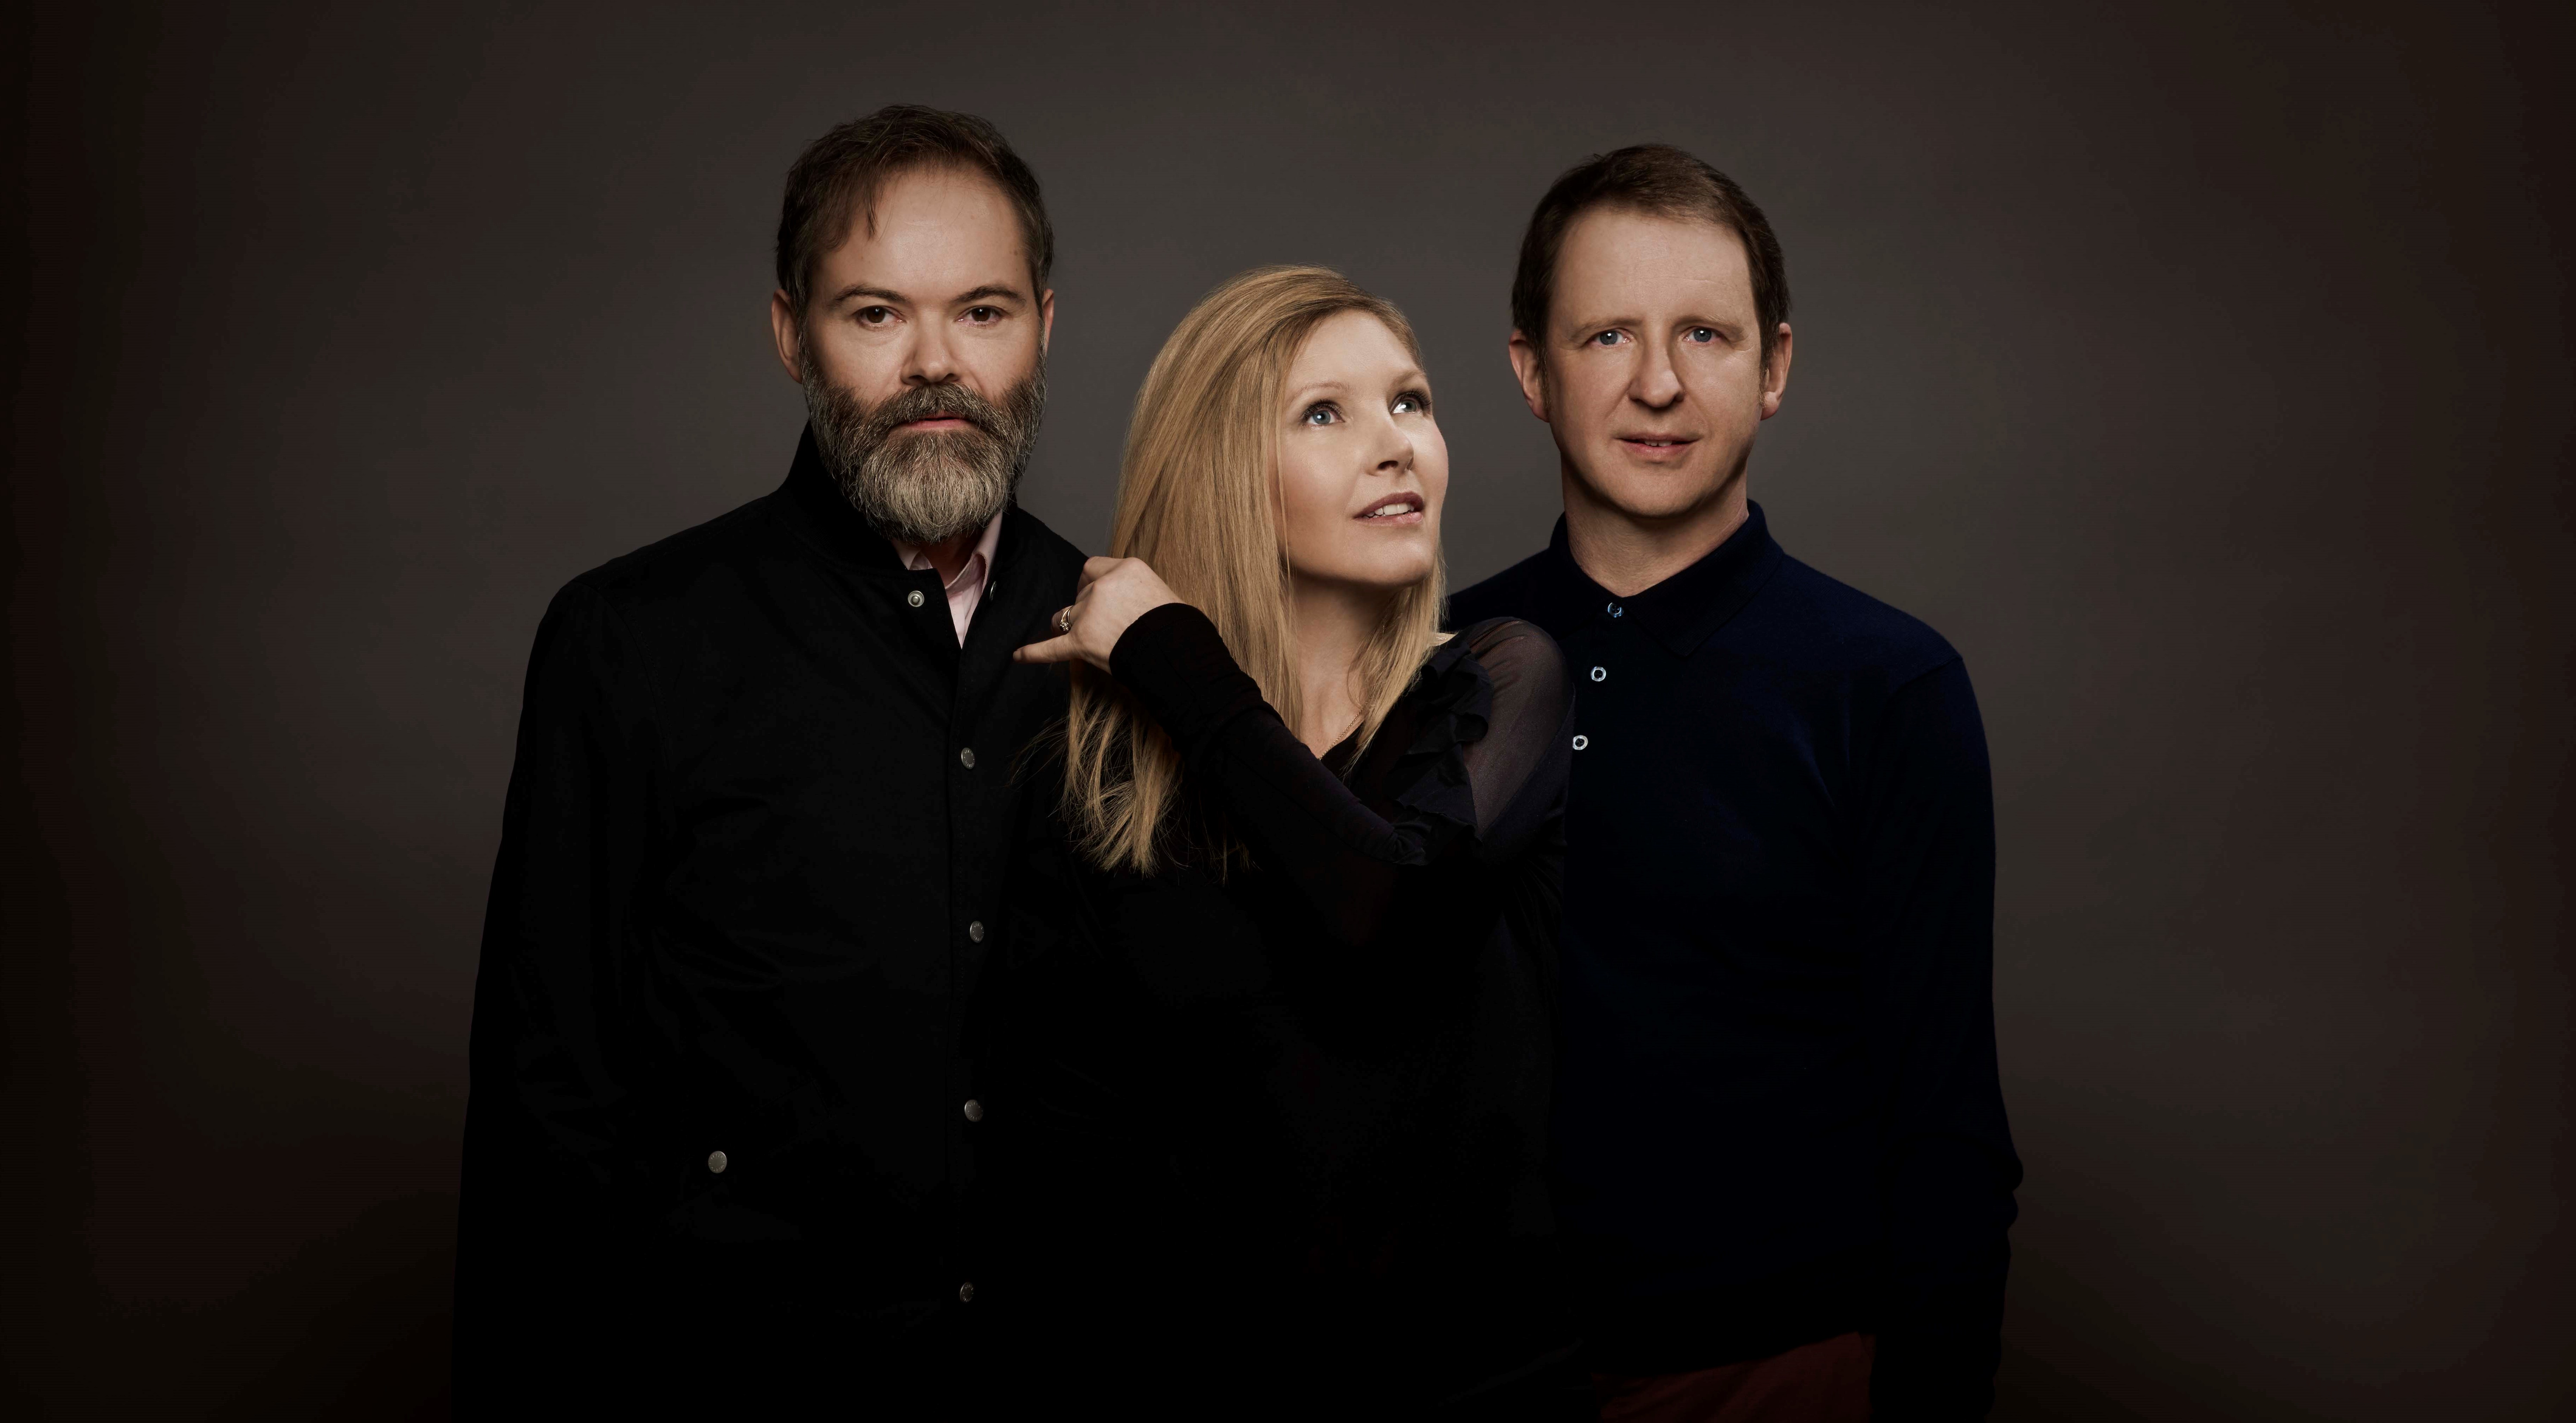 Saint Etienne hit songs and albums